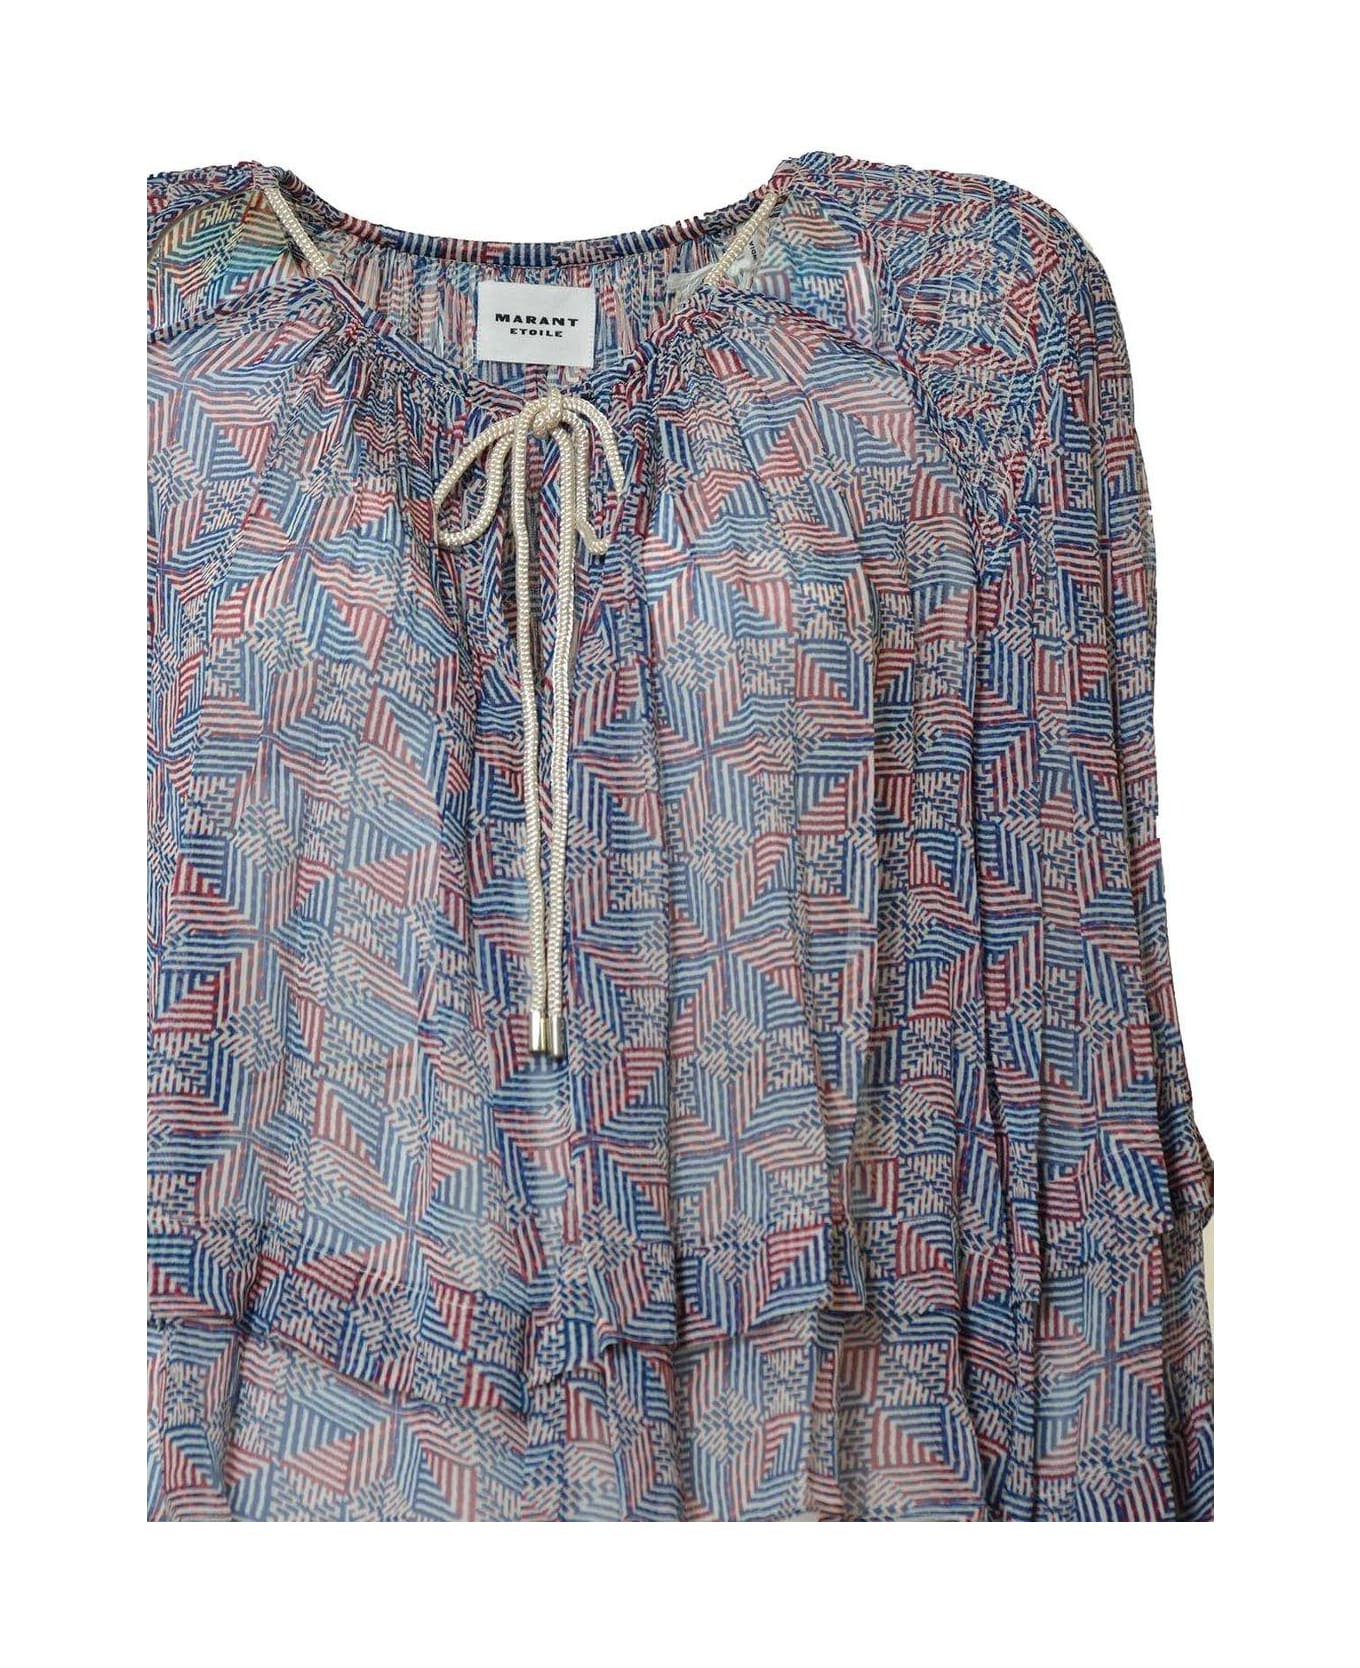 Isabel Marant Floral-printed Tie-neck Layered Blouse - Blu/rosso